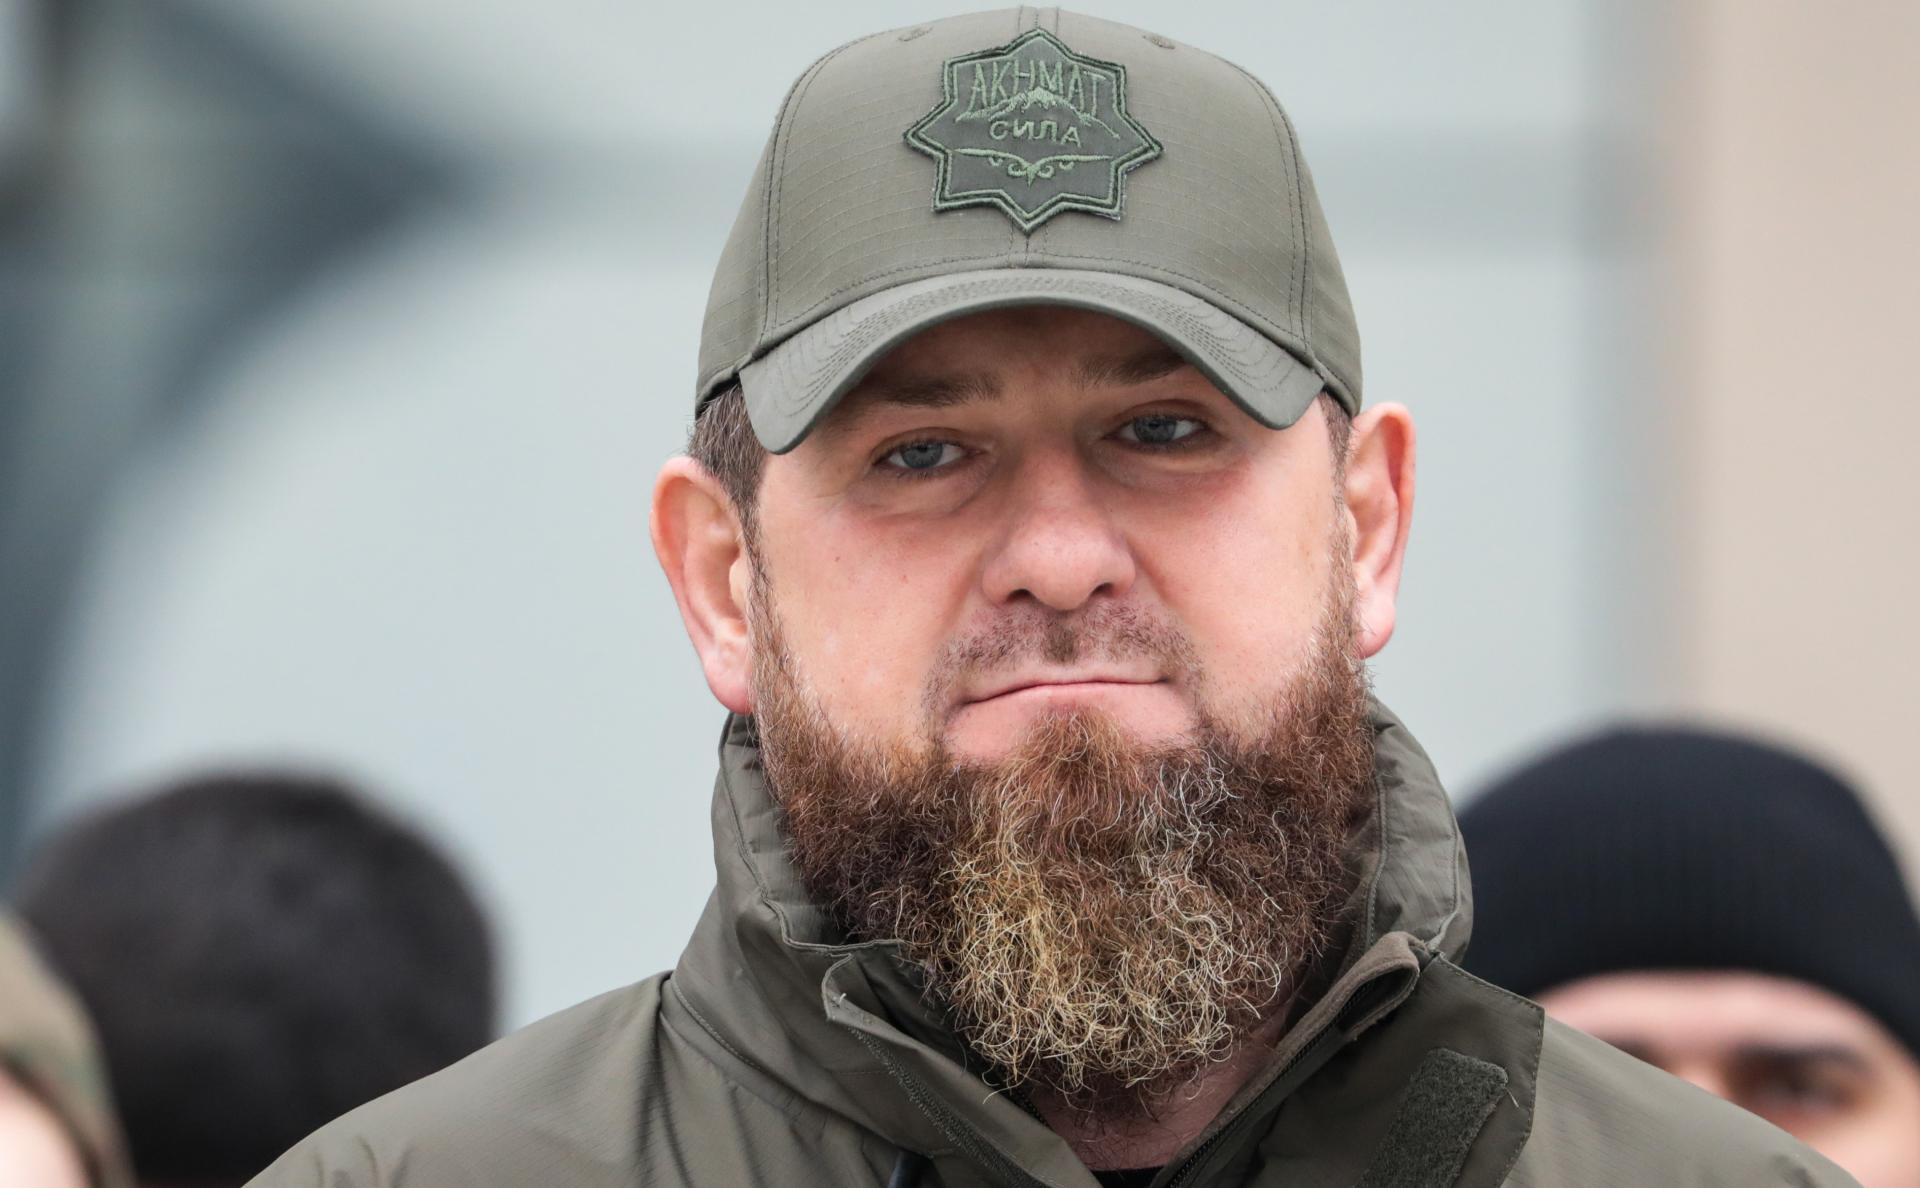 Kadyrov called on the Europeans to throw off power and intimidated the cold winter